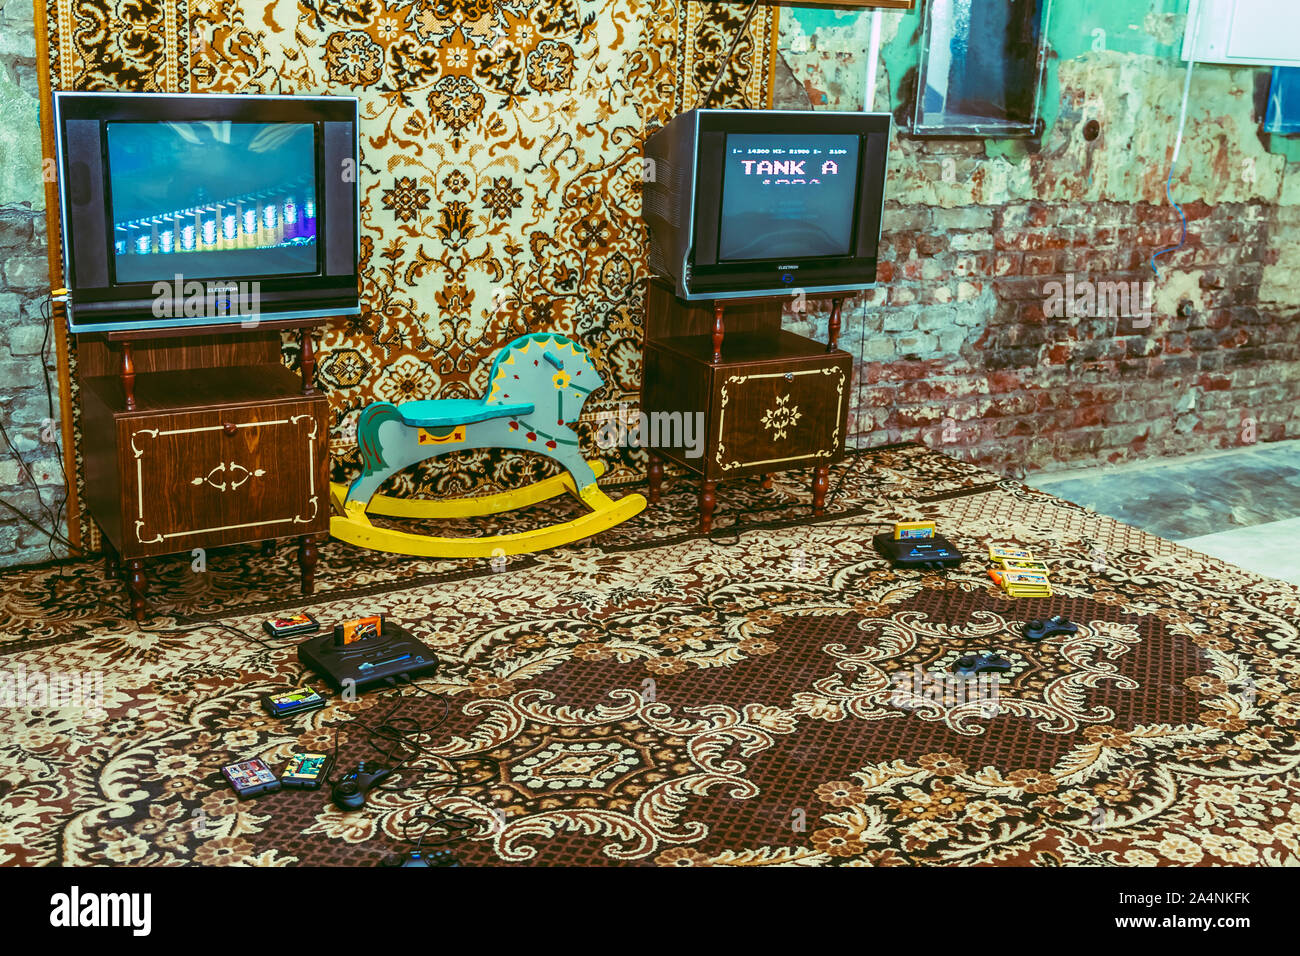 KHARKIV, UKRAINE MAY 28, 2017: Vintage room, old-fashioned carpet, retro TV, sega, game console, 90s collectible bottles and standard wooden cabinet. Stock Photo